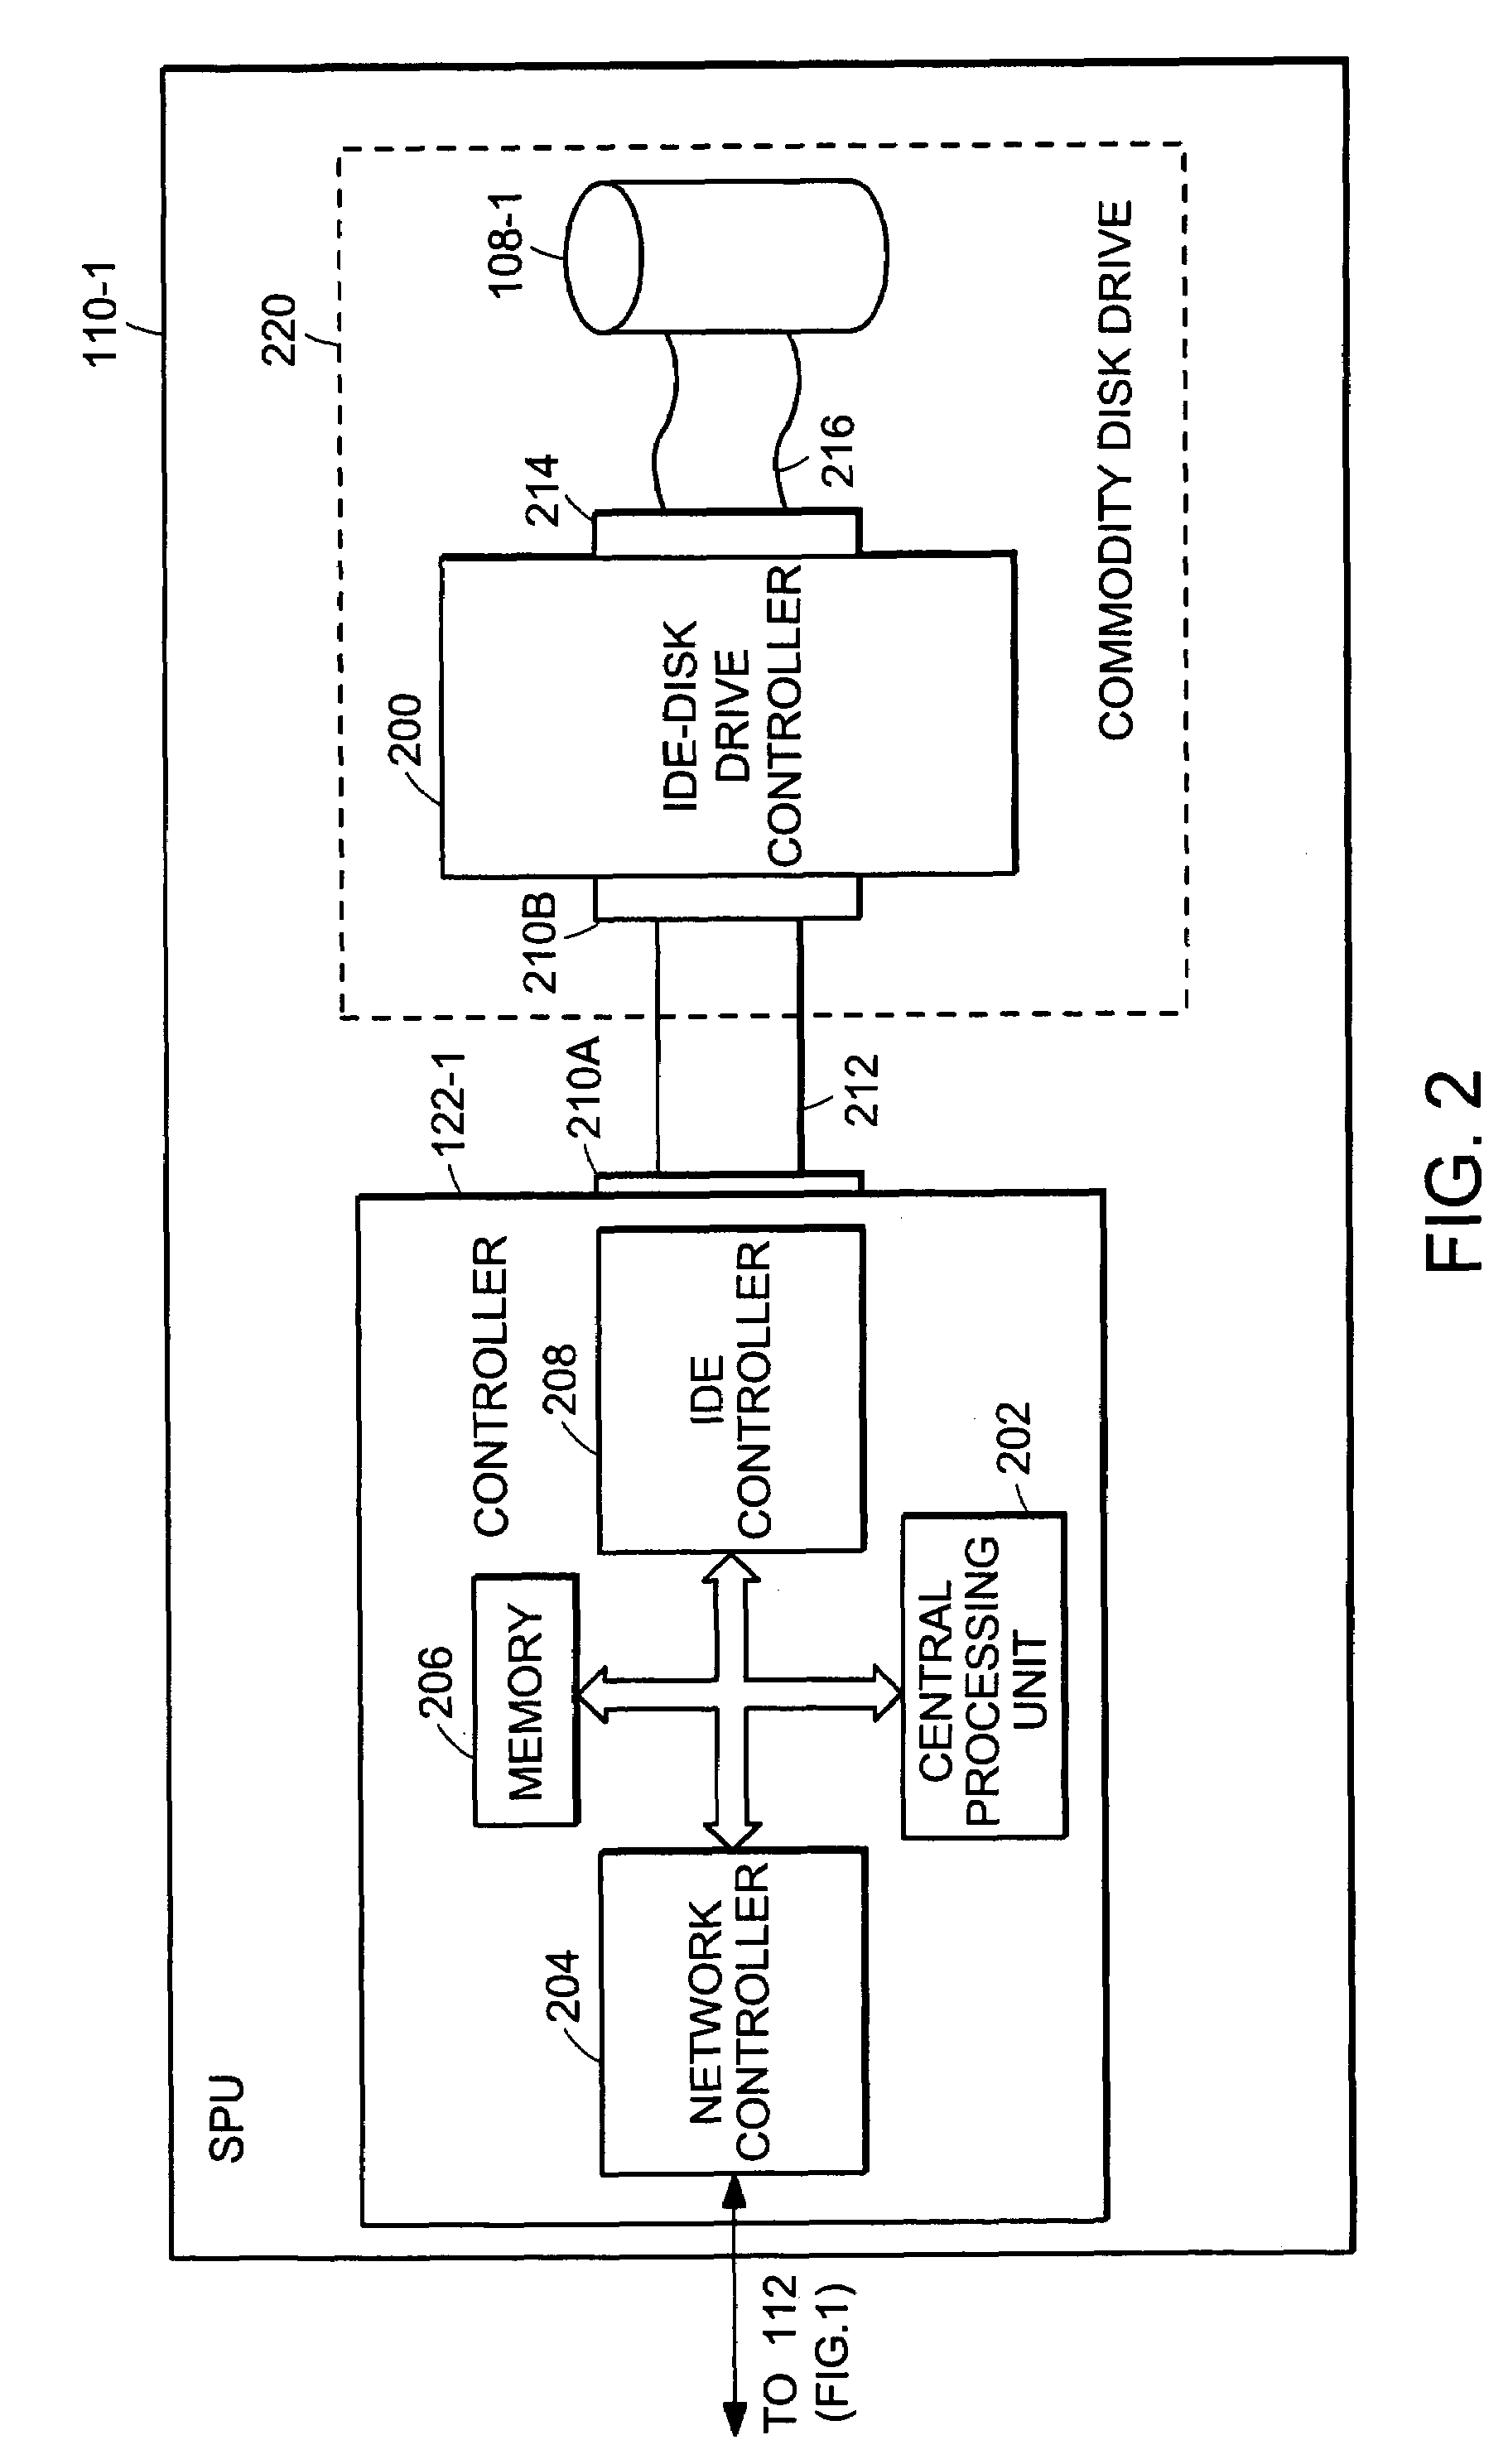 Disk mirror architecture for database appliance with locally balanced regeneration